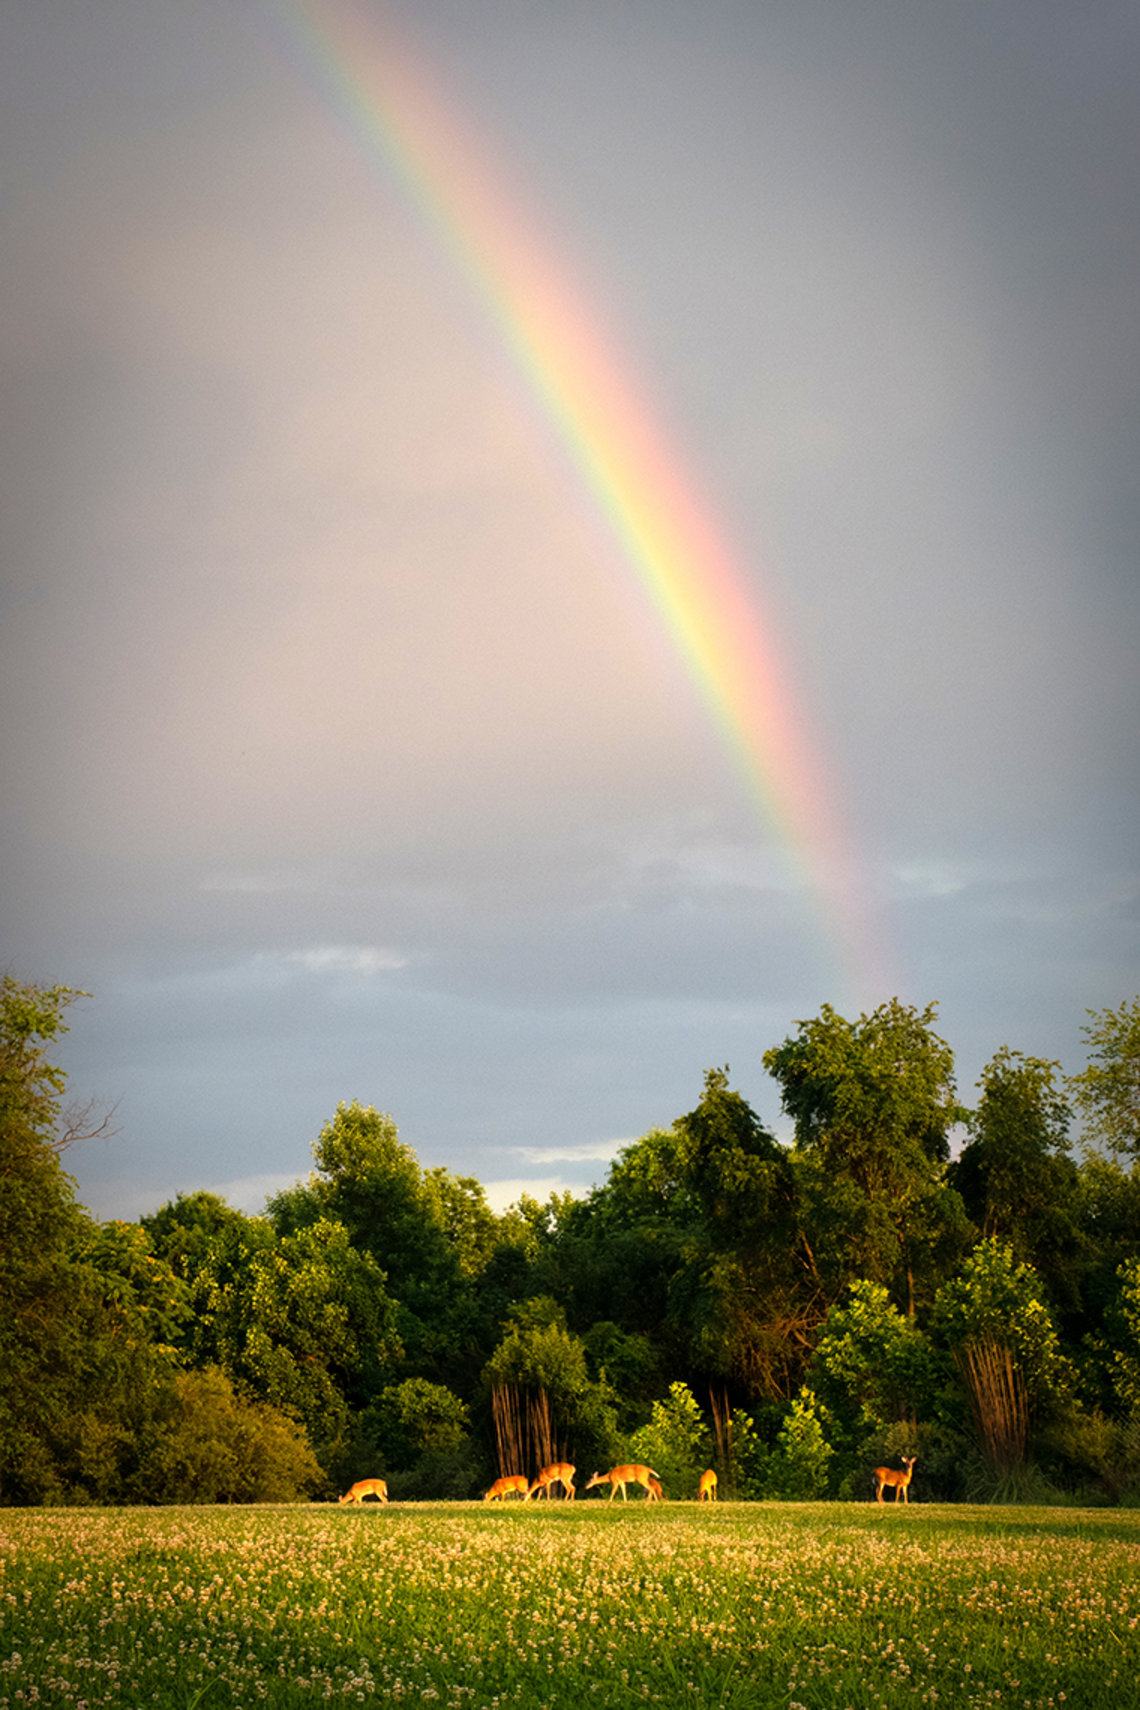 A giant rainbow looms above a grassy field, as deer graze in the distance.